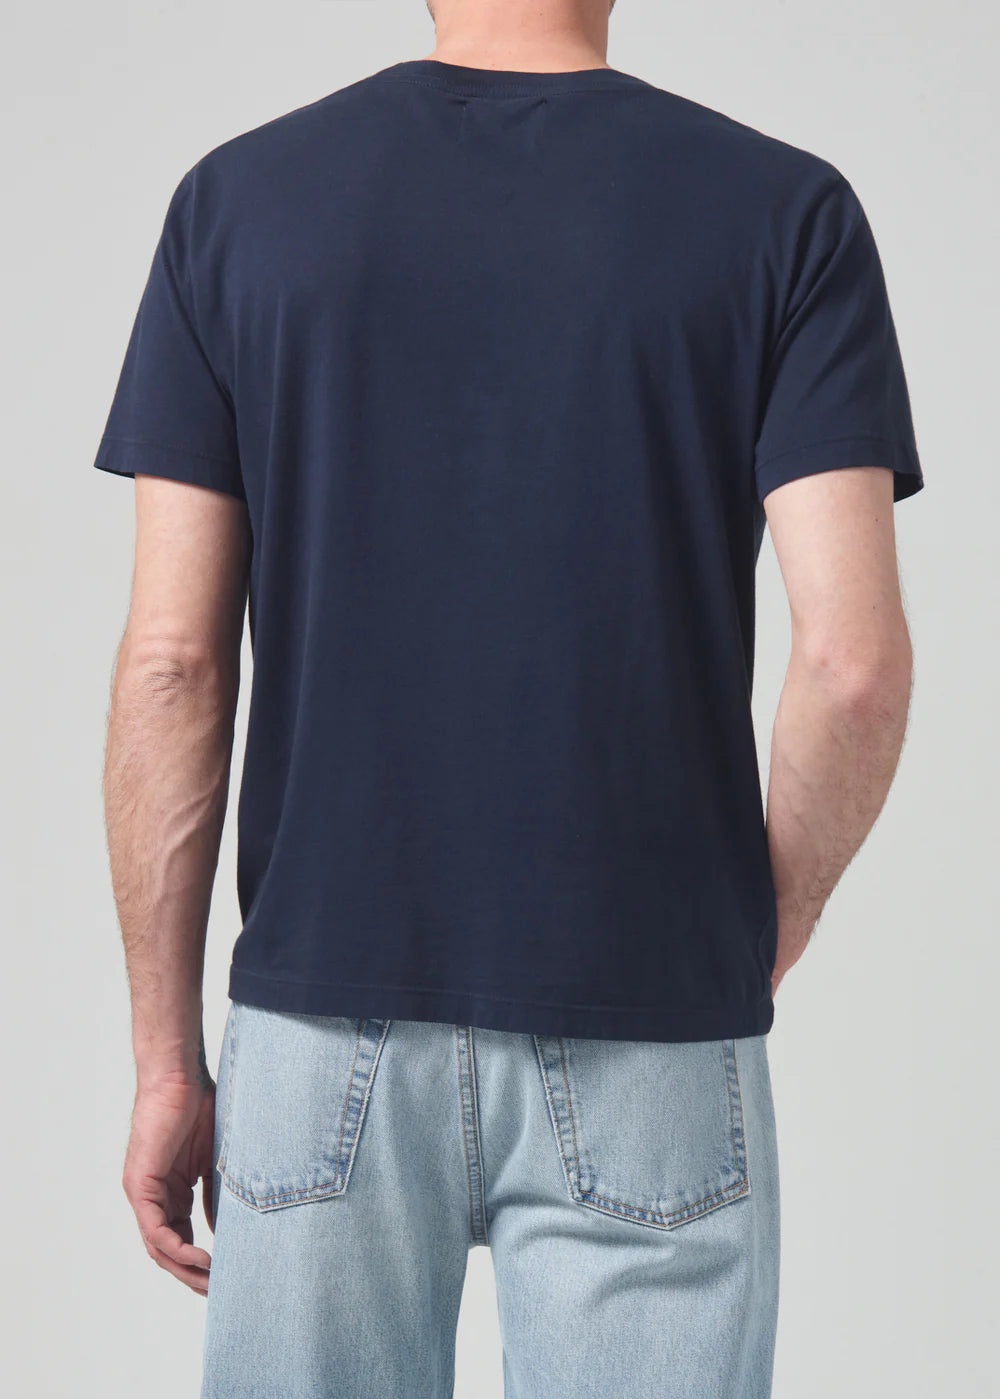 Citizens of Humanity Men's Everyday Short Sleeve Tee